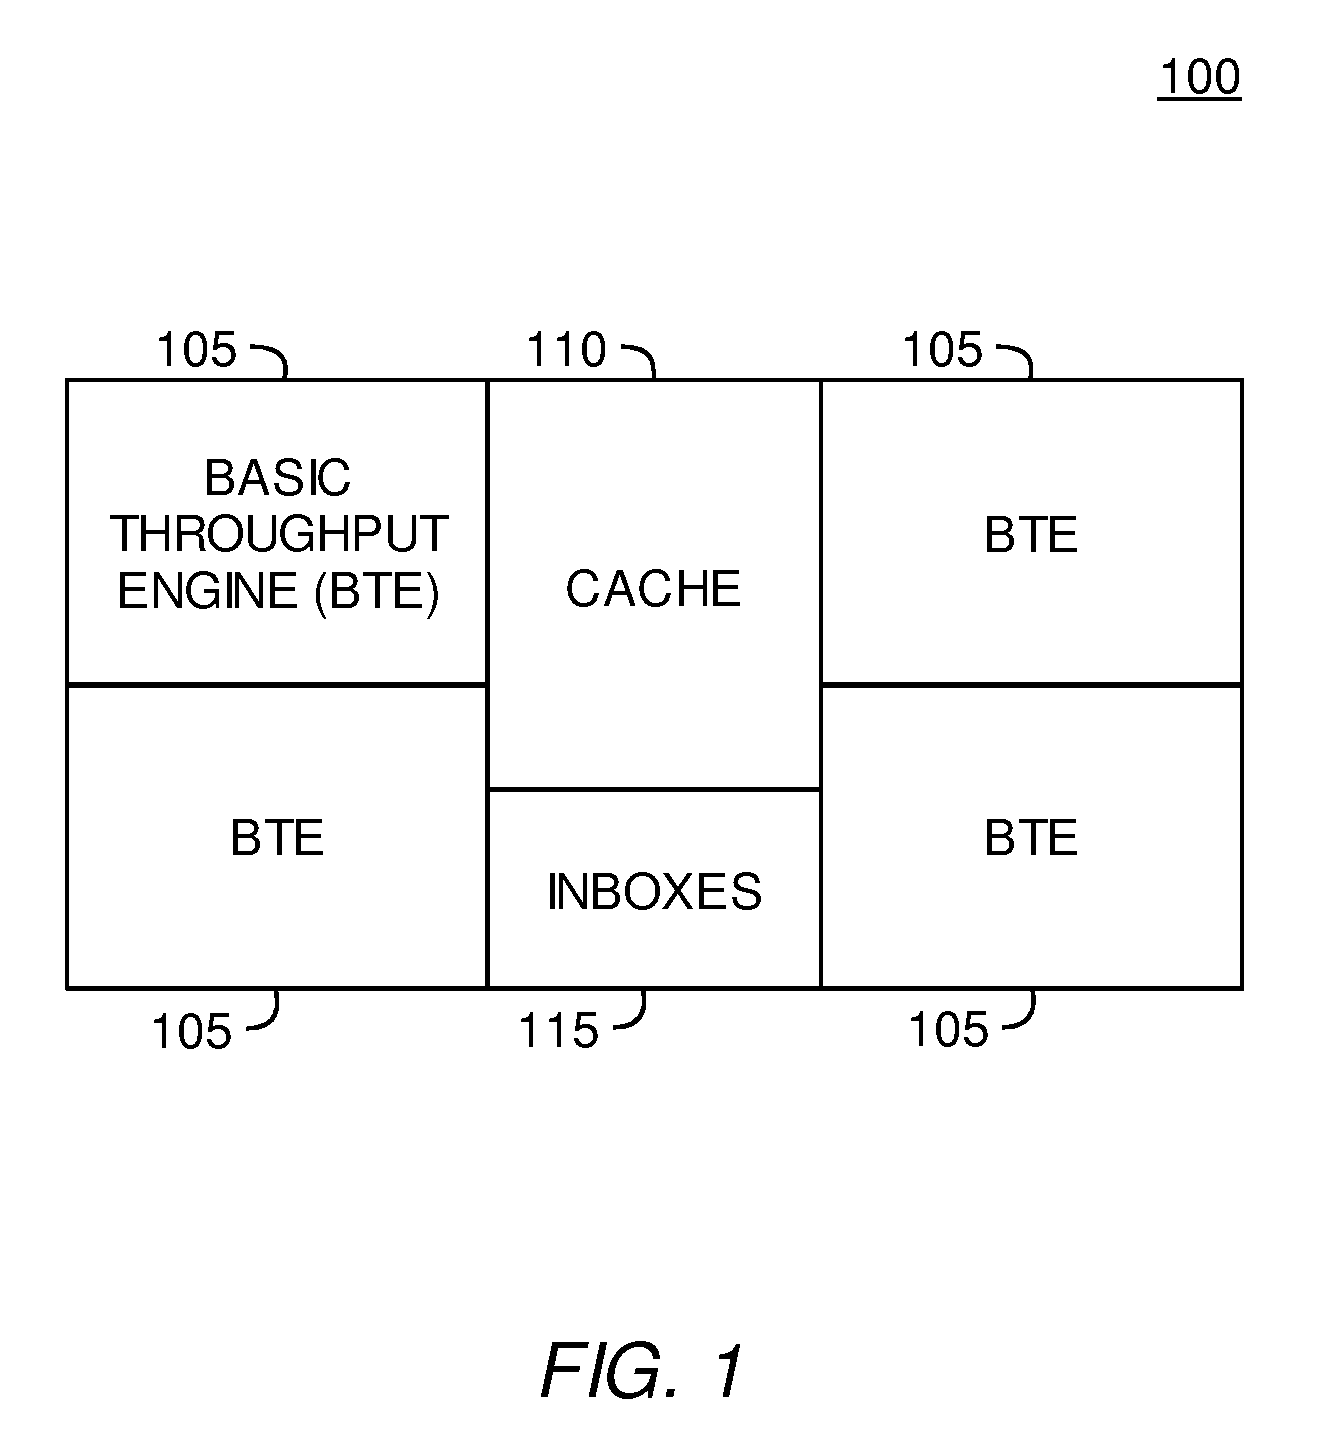 Dynamically configuring and selecting multiple ray tracing intersection methods